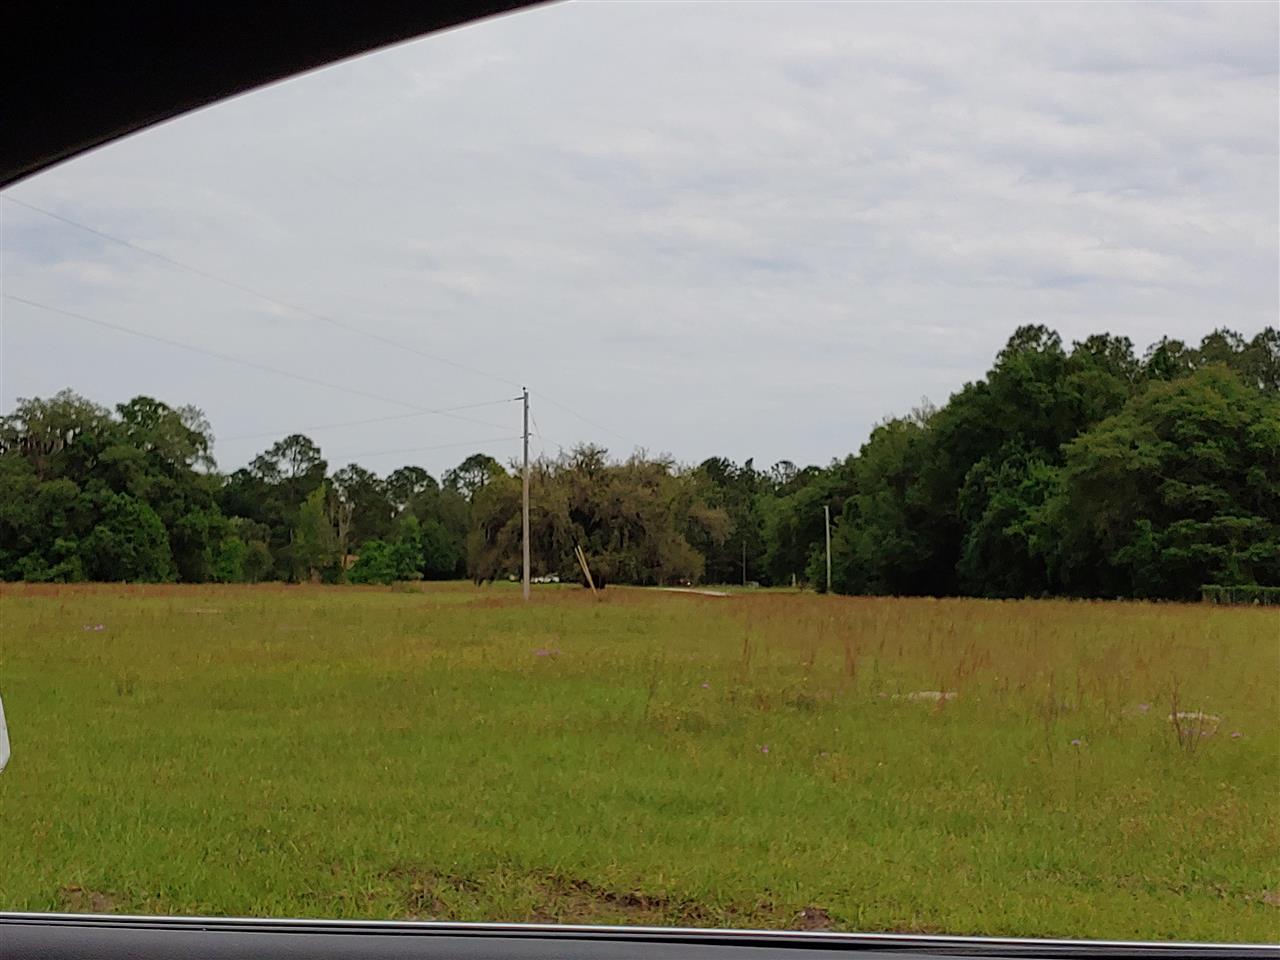 1954 US 221,PERRY,Florida 32347,Lots and land,US 221,332171